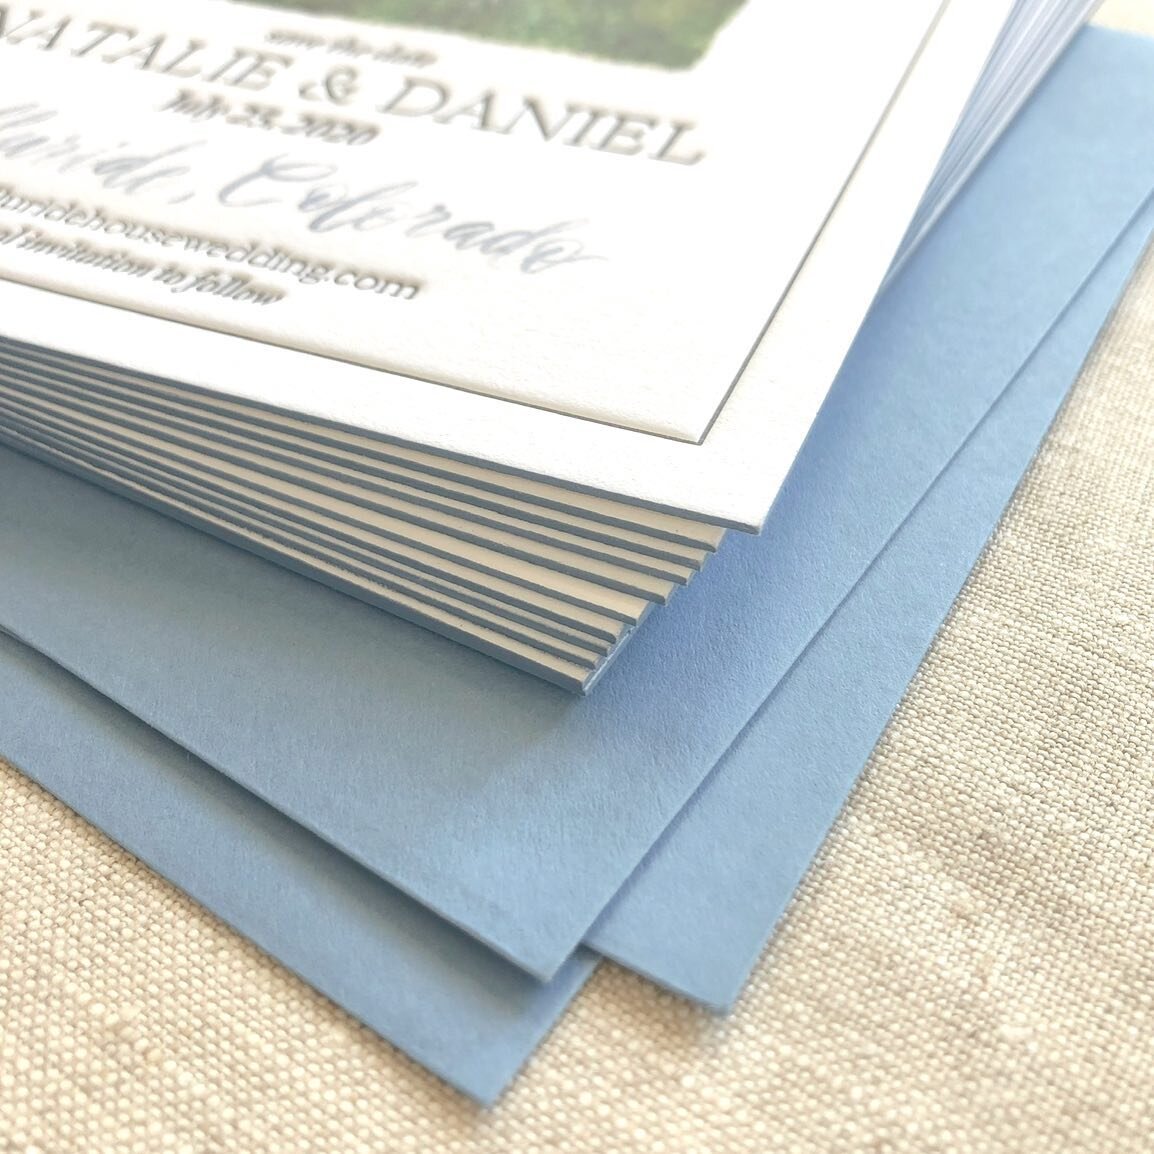 The best kind of post-holiday-weekend-Monday blues! These custom painted edges to match the envelopes has my 💙!
.
.
.
.
.
.
.
.
#weddingpaper #custominvitations #customsavethedate #weddingdetails #letterpress #letterpressweddinginvitations #letterpr